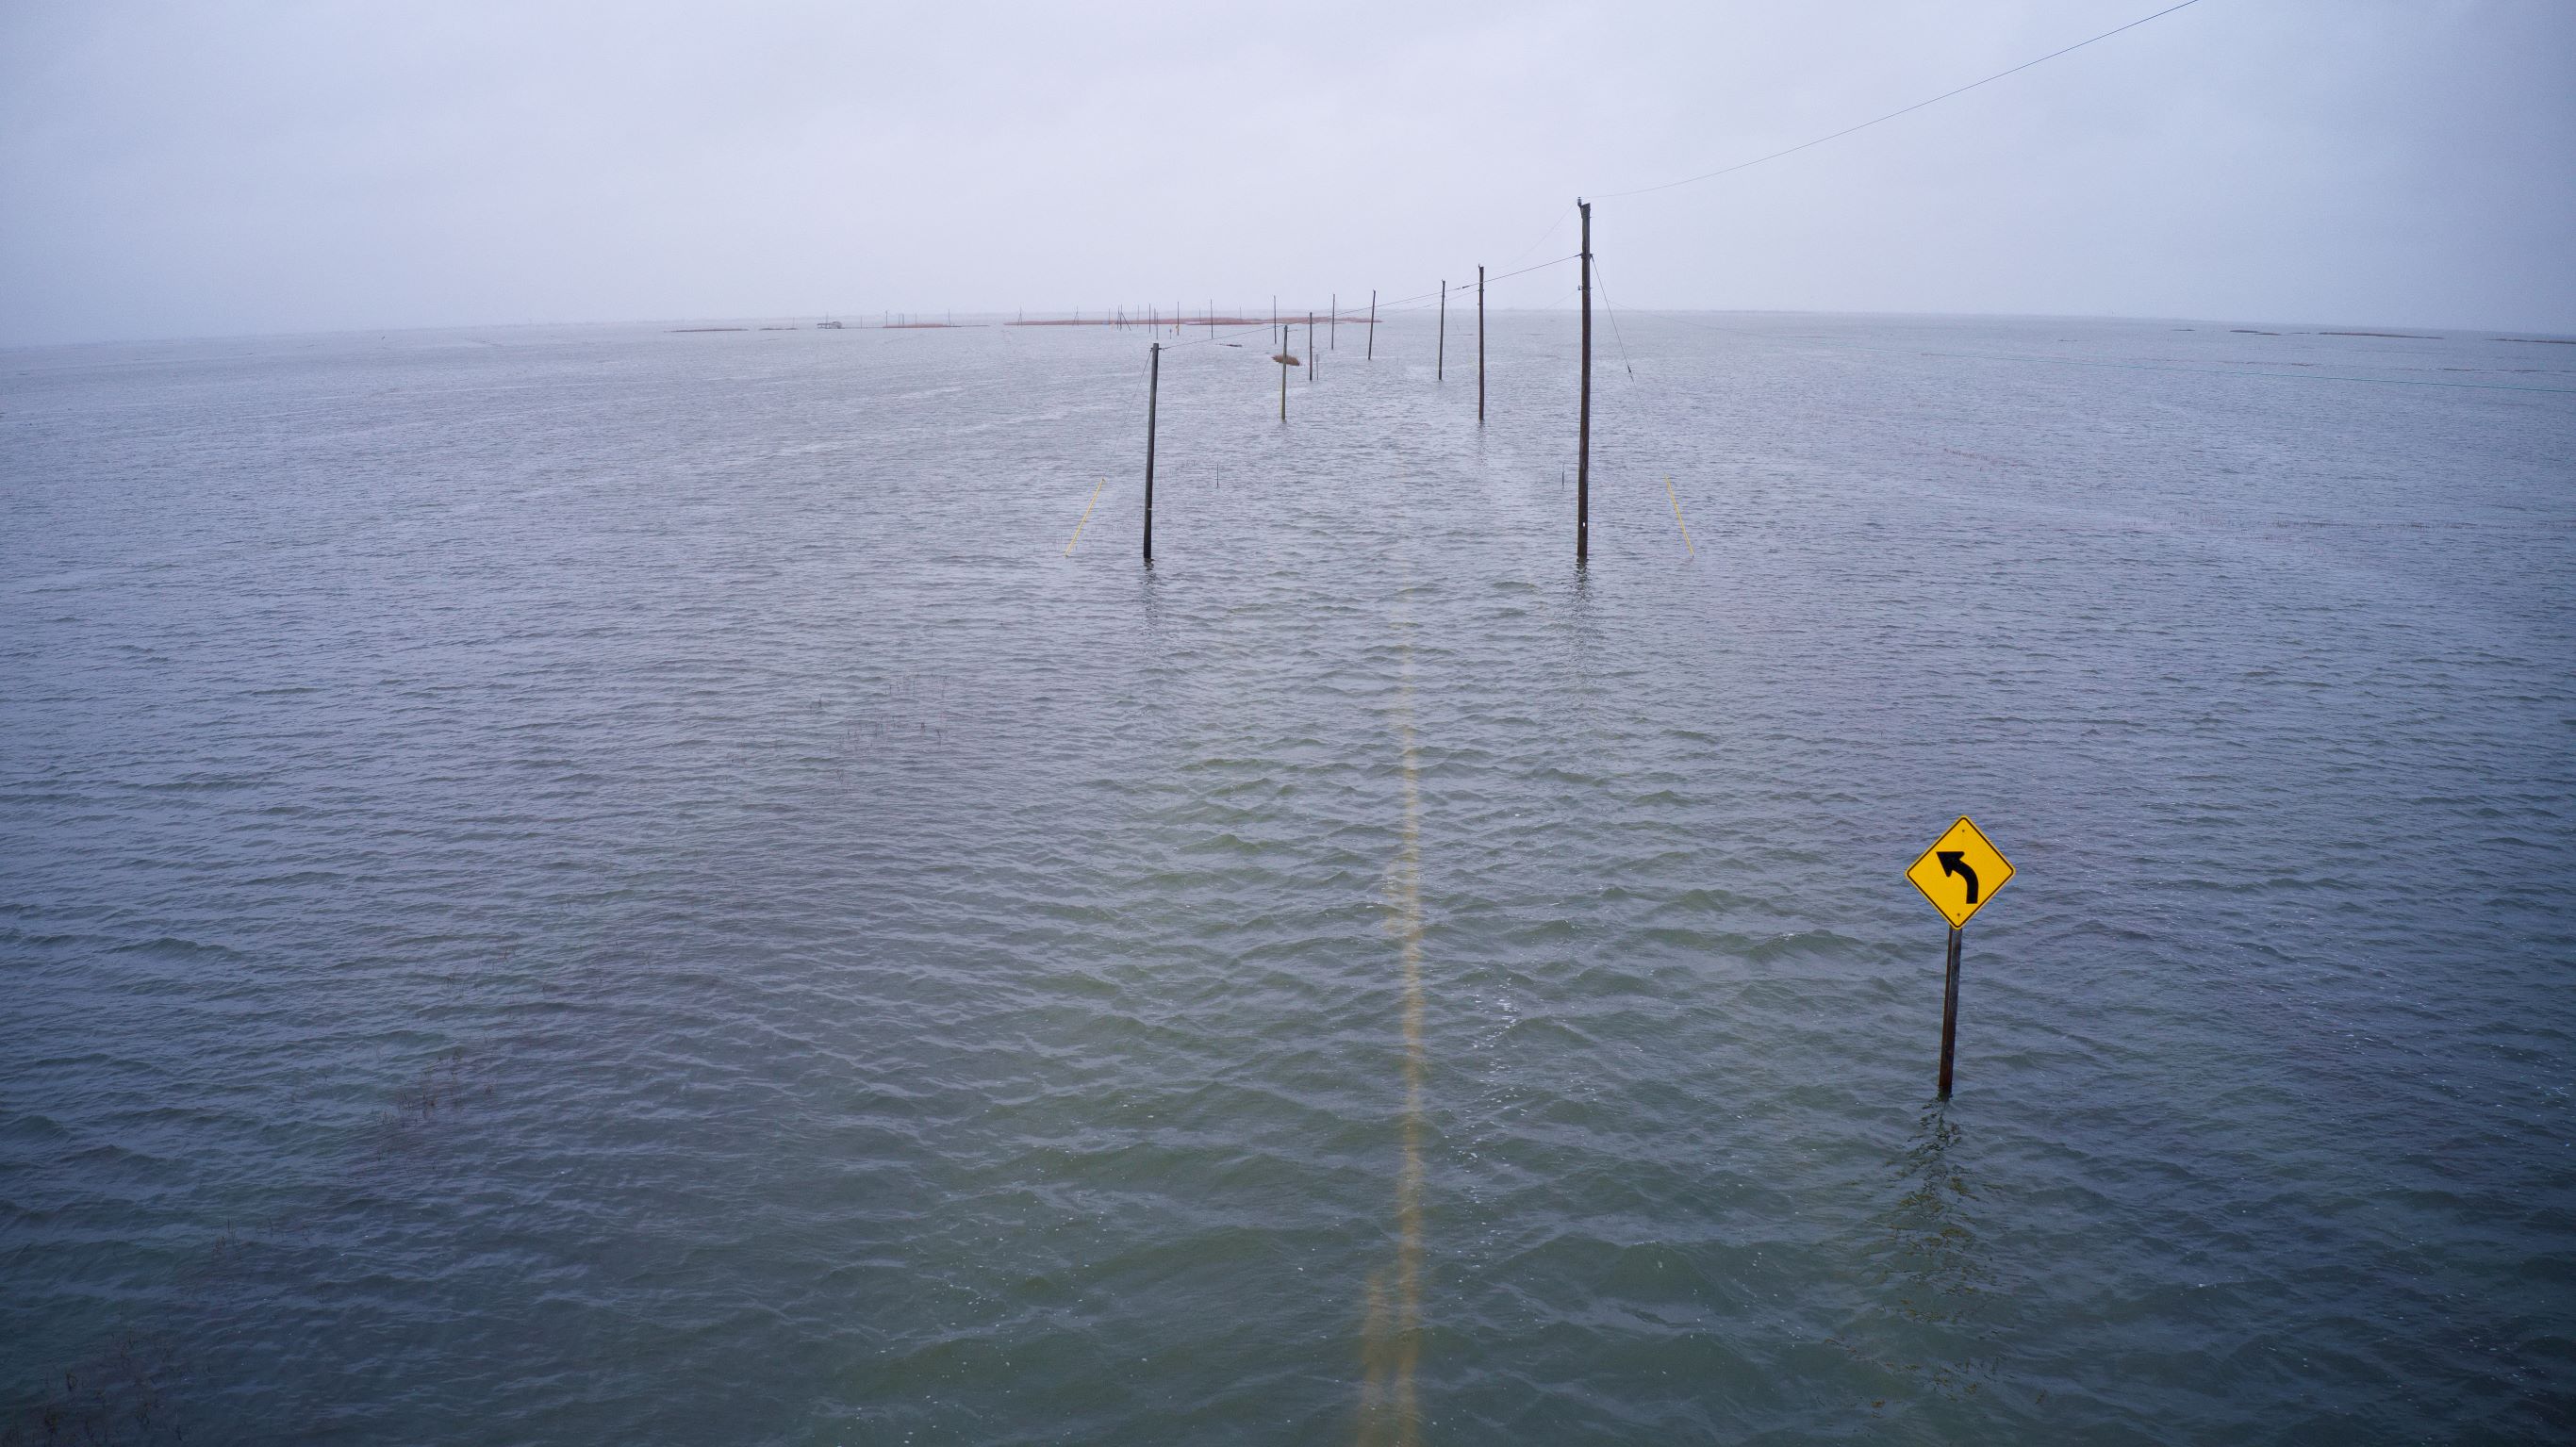 : Image shows a roadway, turn sign, and electric cables flooded by water on all sides.